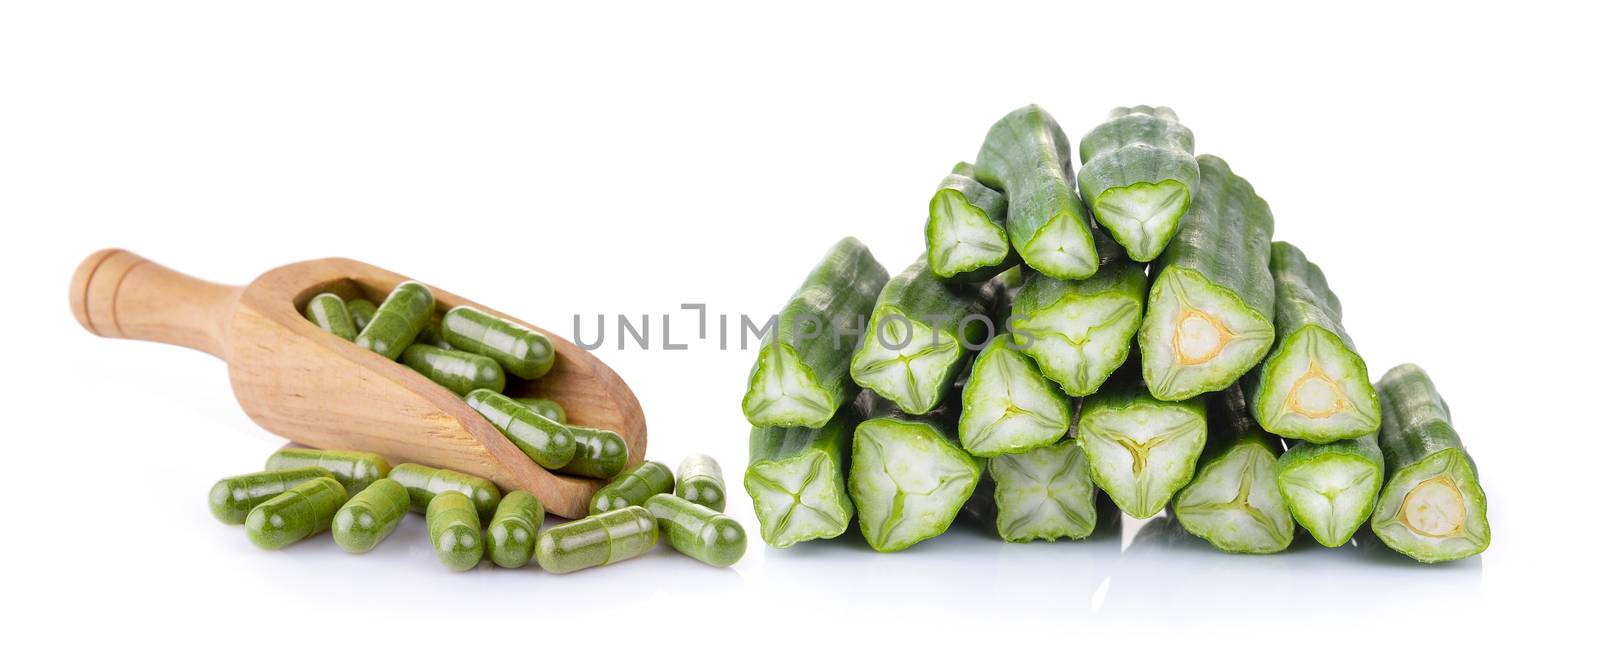 Moringa capsules and moringa in the scoop on white background by sommai